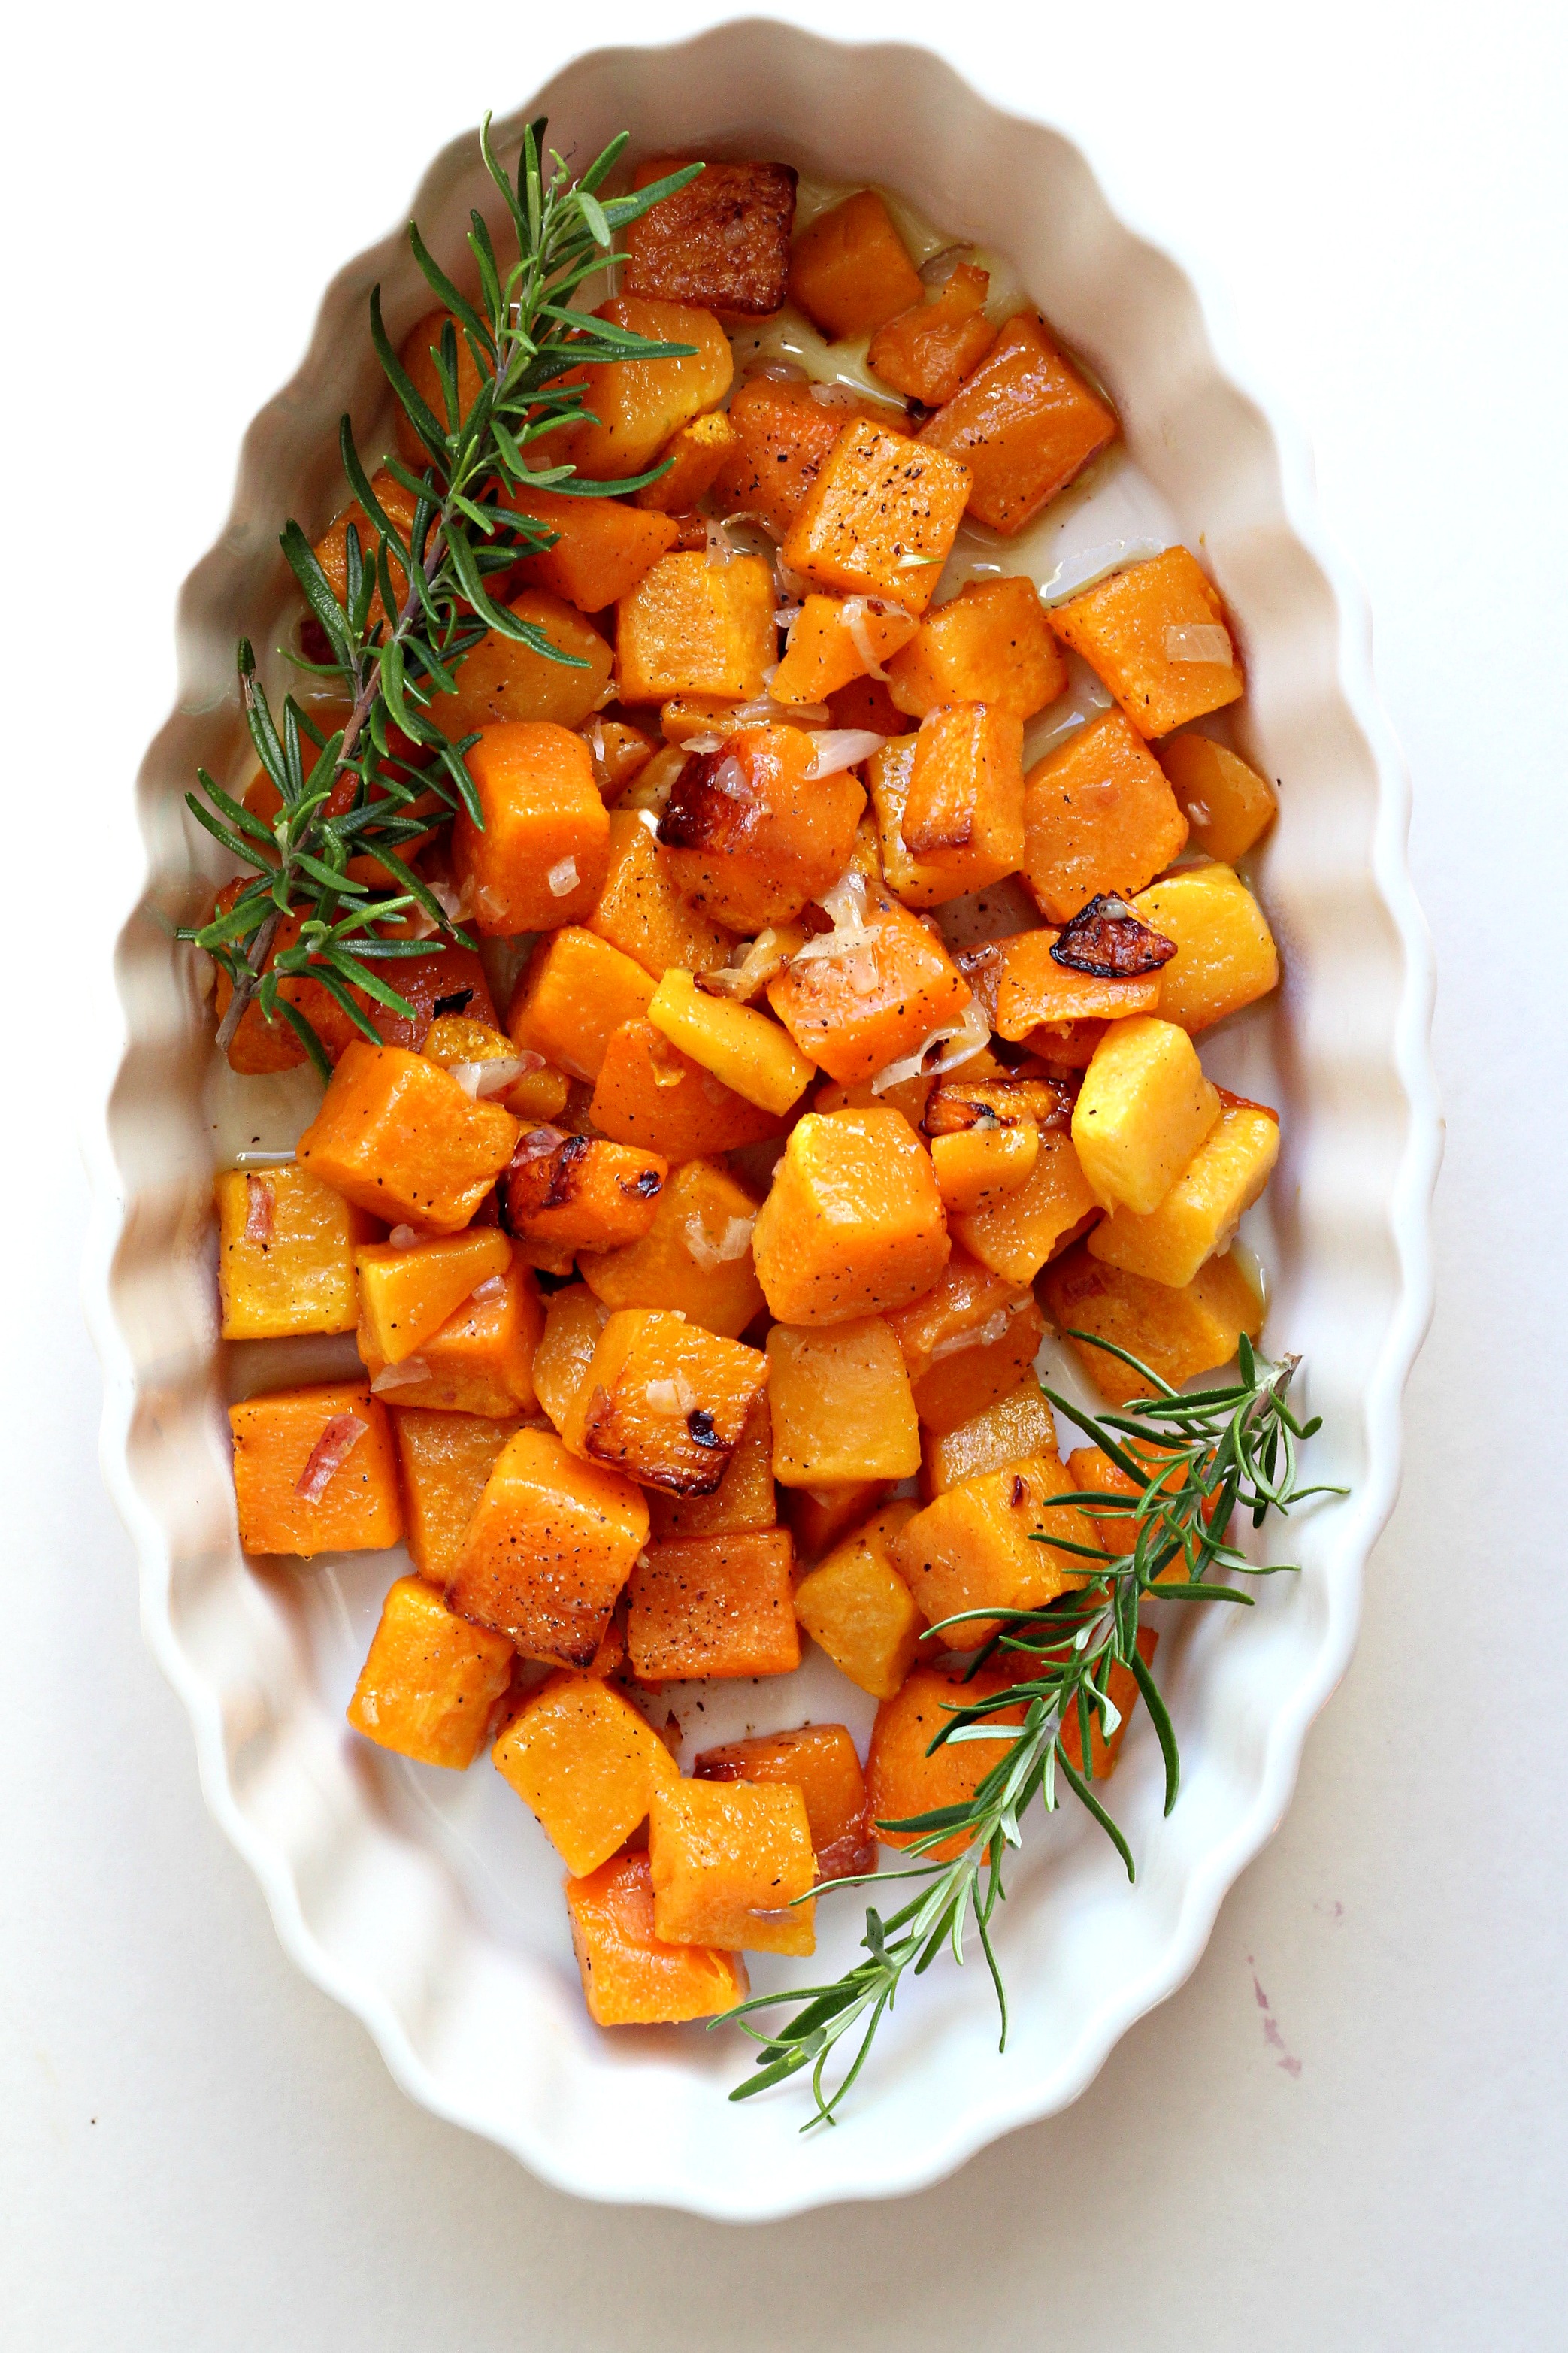 This Shallot and Rosemary Roasted Butternut Squash is a great side dish to accompany any dinner.